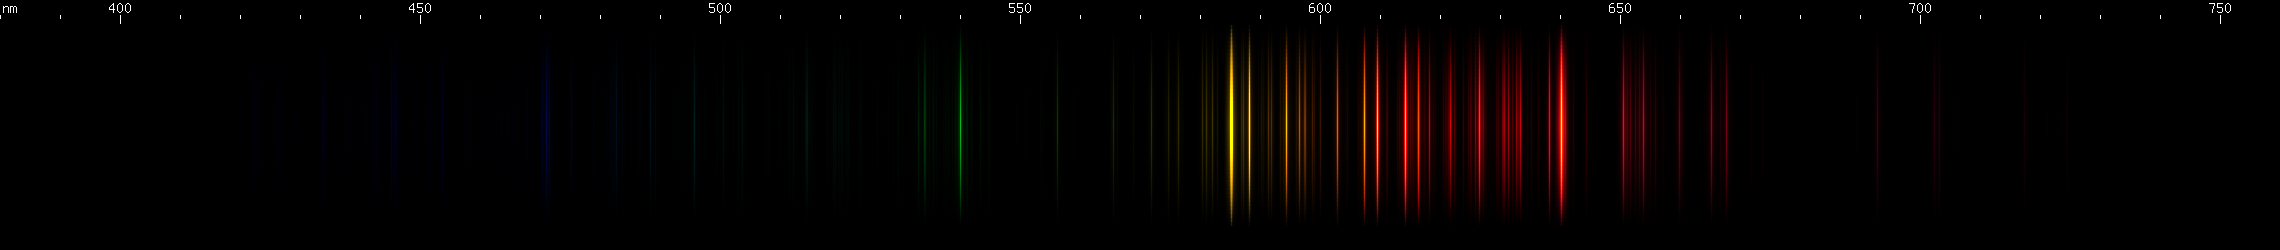 Spectral Lines of Neon